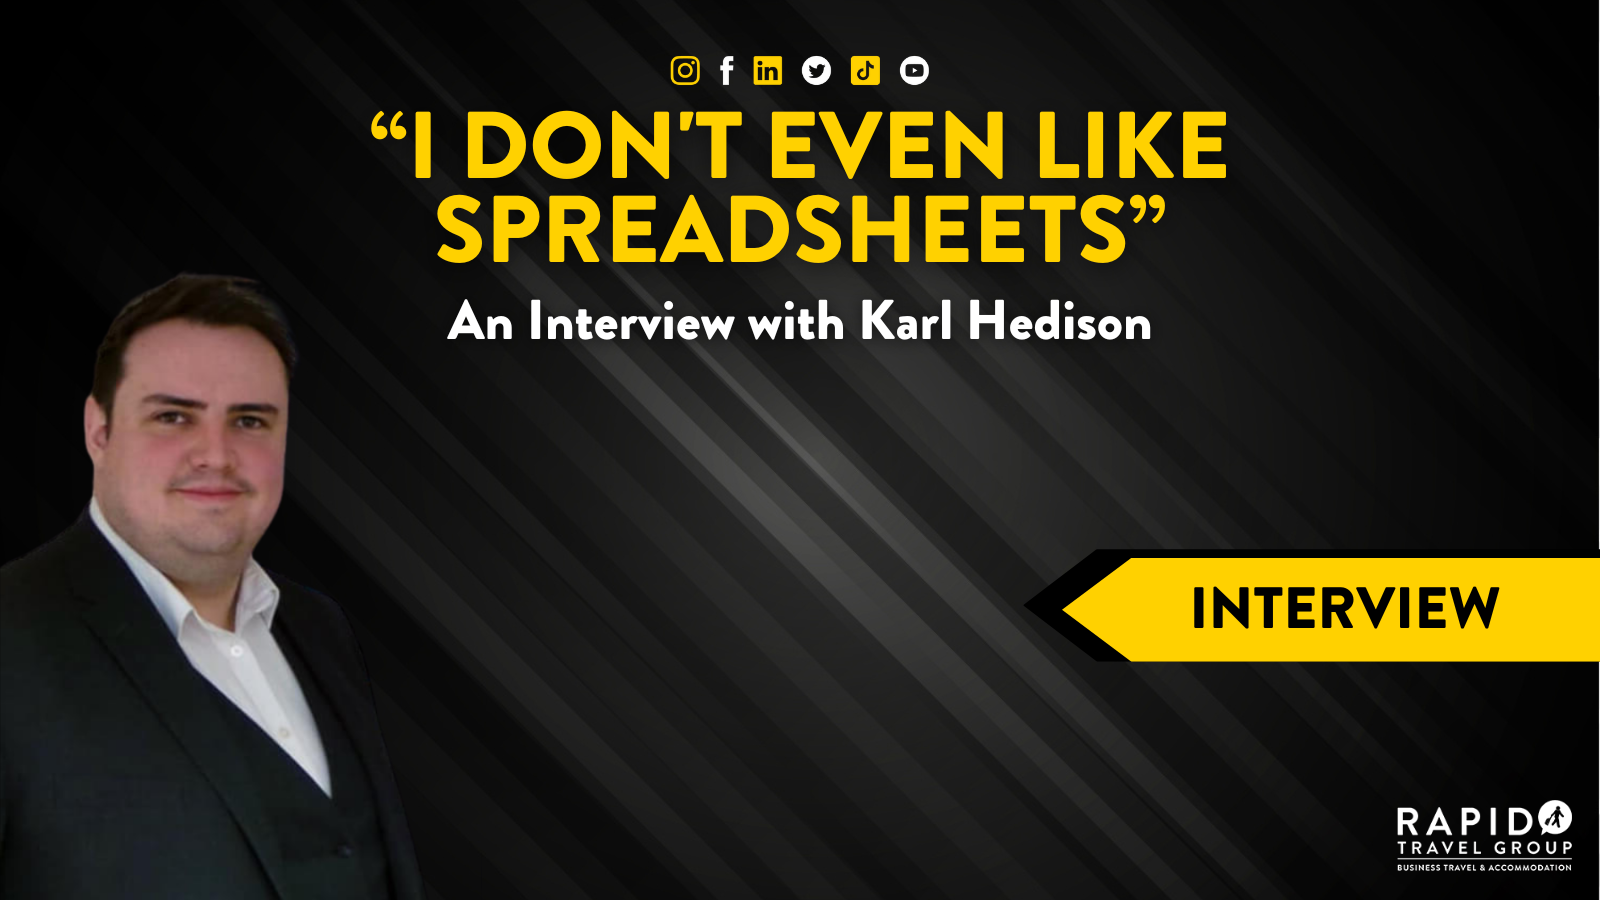 "I don't even like spreadsheets": An Interview With Karl Hedison